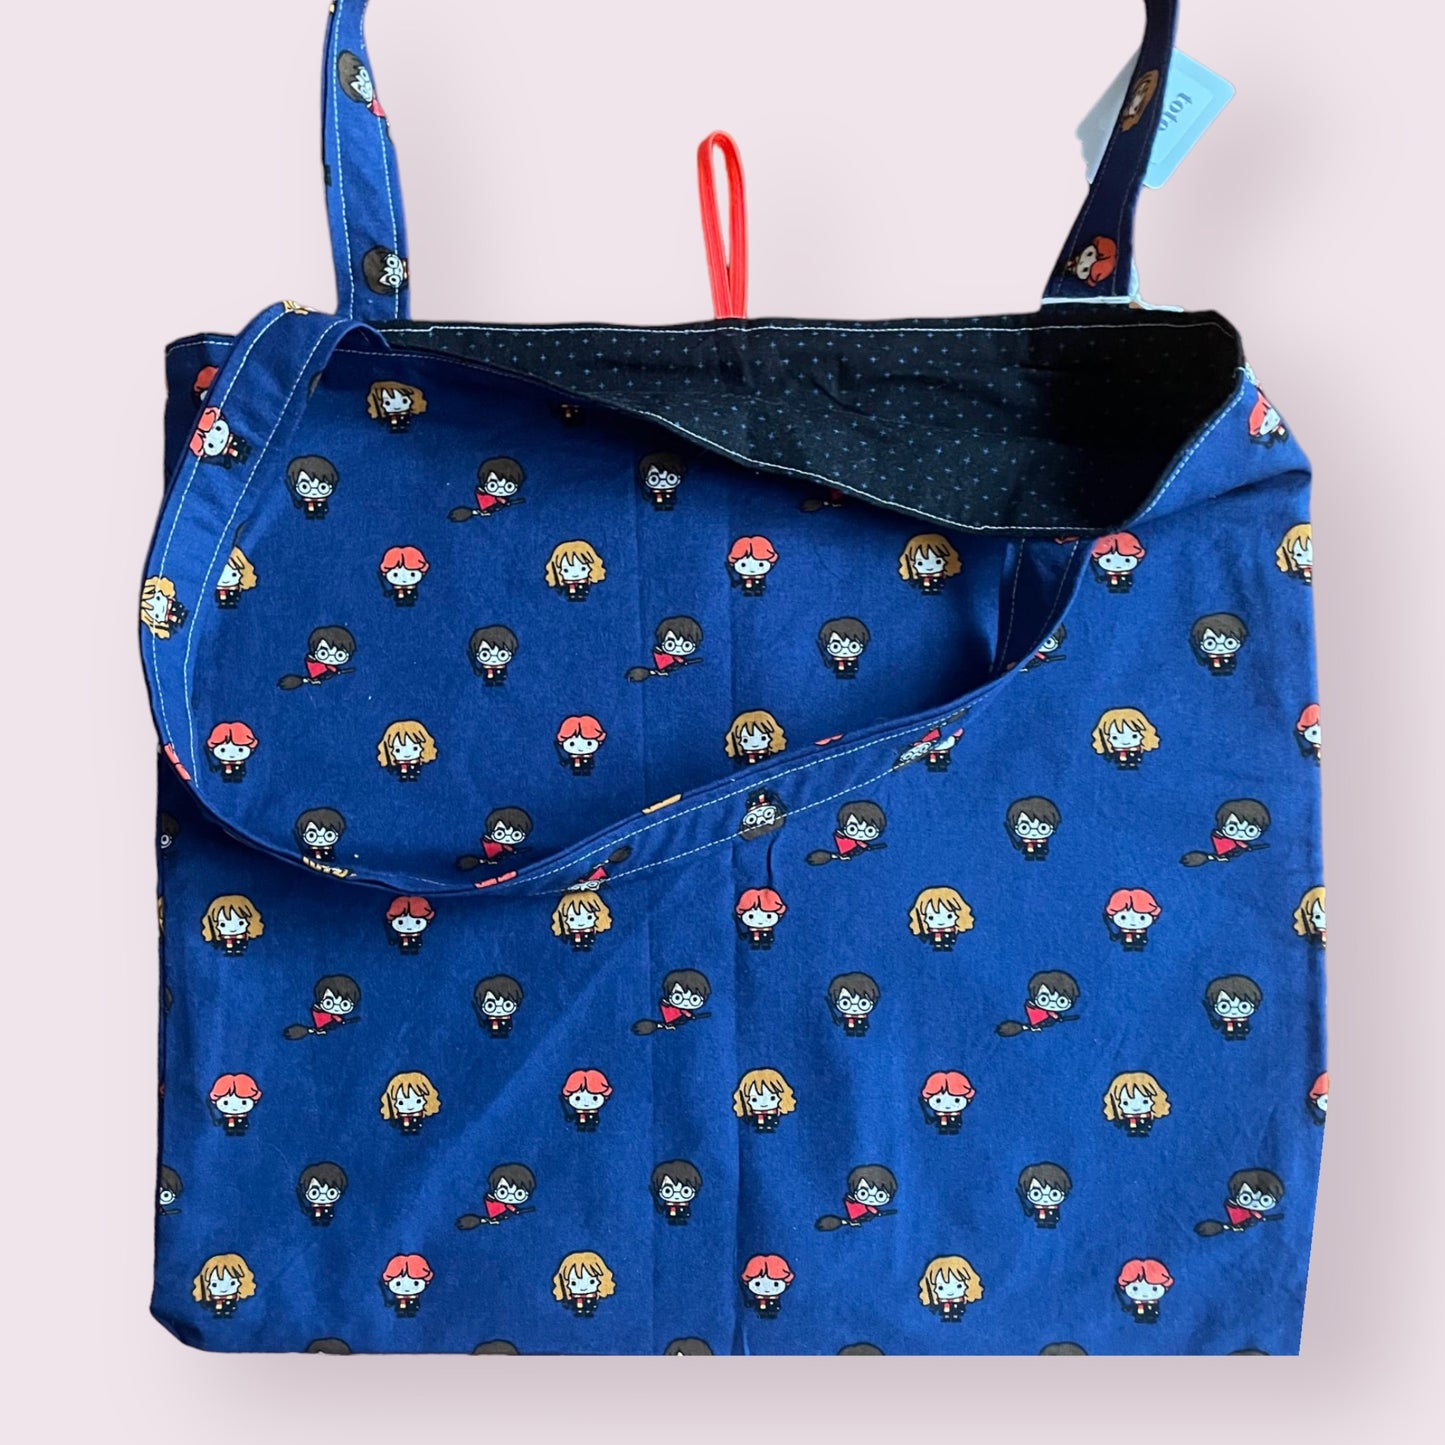 The boy who lived reusable/reversible tote